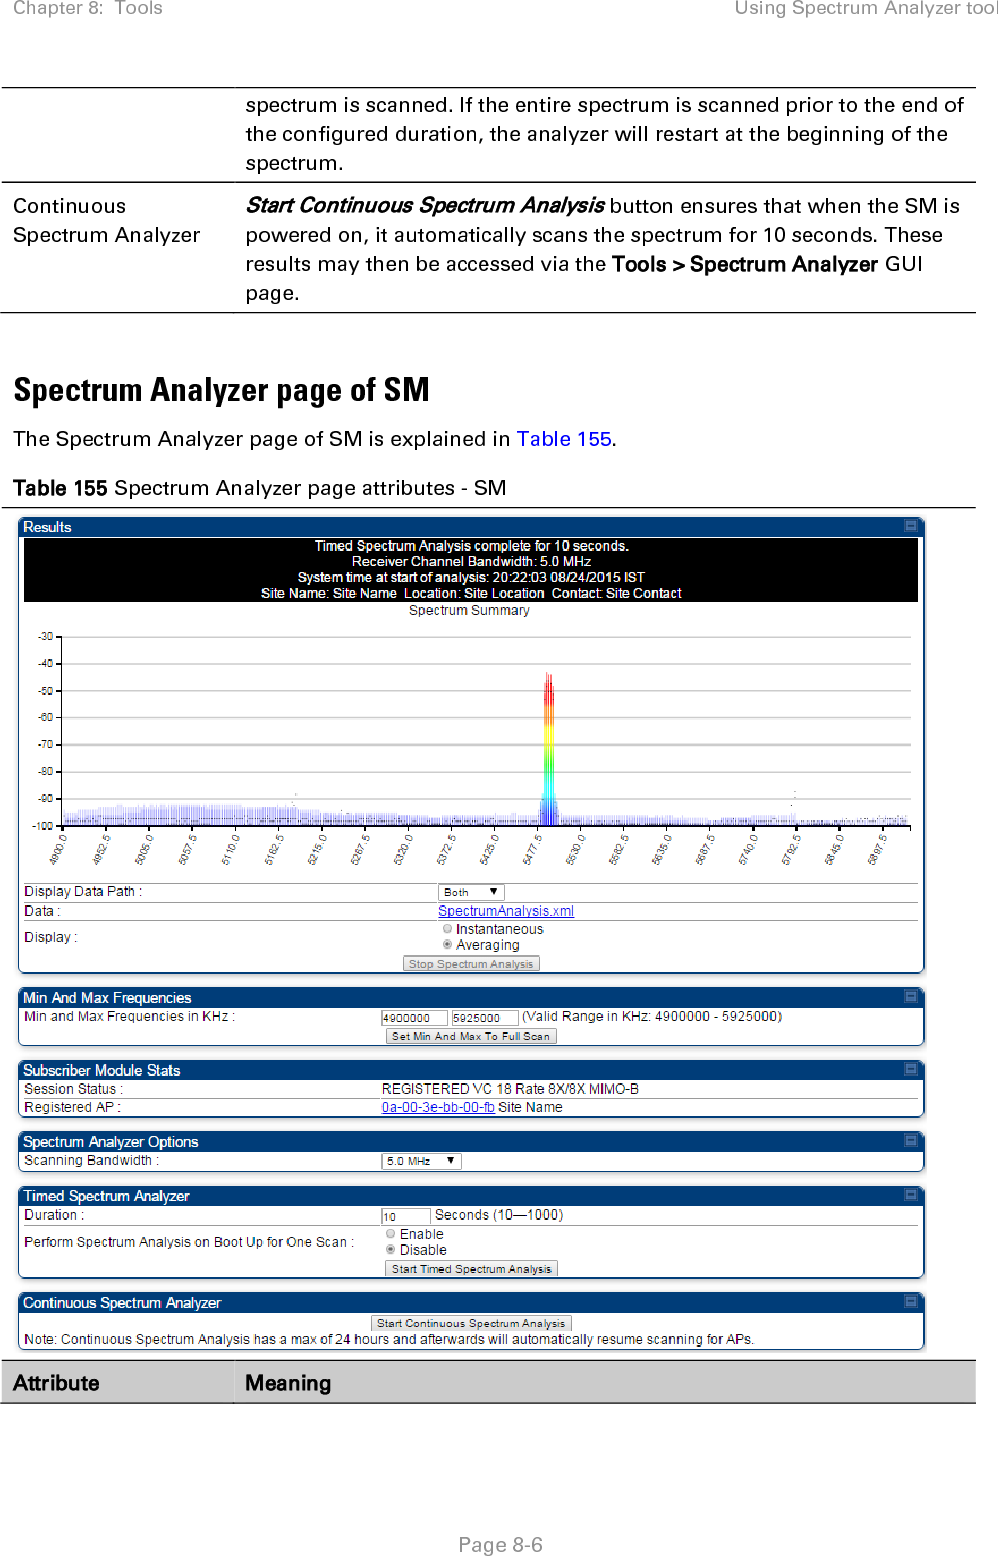 Chapter 8:  Tools Using Spectrum Analyzer tool   Page 8-6 spectrum is scanned. If the entire spectrum is scanned prior to the end of the configured duration, the analyzer will restart at the beginning of the spectrum. Continuous Spectrum Analyzer  Start Continuous Spectrum Analysis button ensures that when the SM is powered on, it automatically scans the spectrum for 10 seconds. These results may then be accessed via the Tools &gt; Spectrum Analyzer GUI page.  Spectrum Analyzer page of SM The Spectrum Analyzer page of SM is explained in Table 155. Table 155 Spectrum Analyzer page attributes - SM  Attribute Meaning 